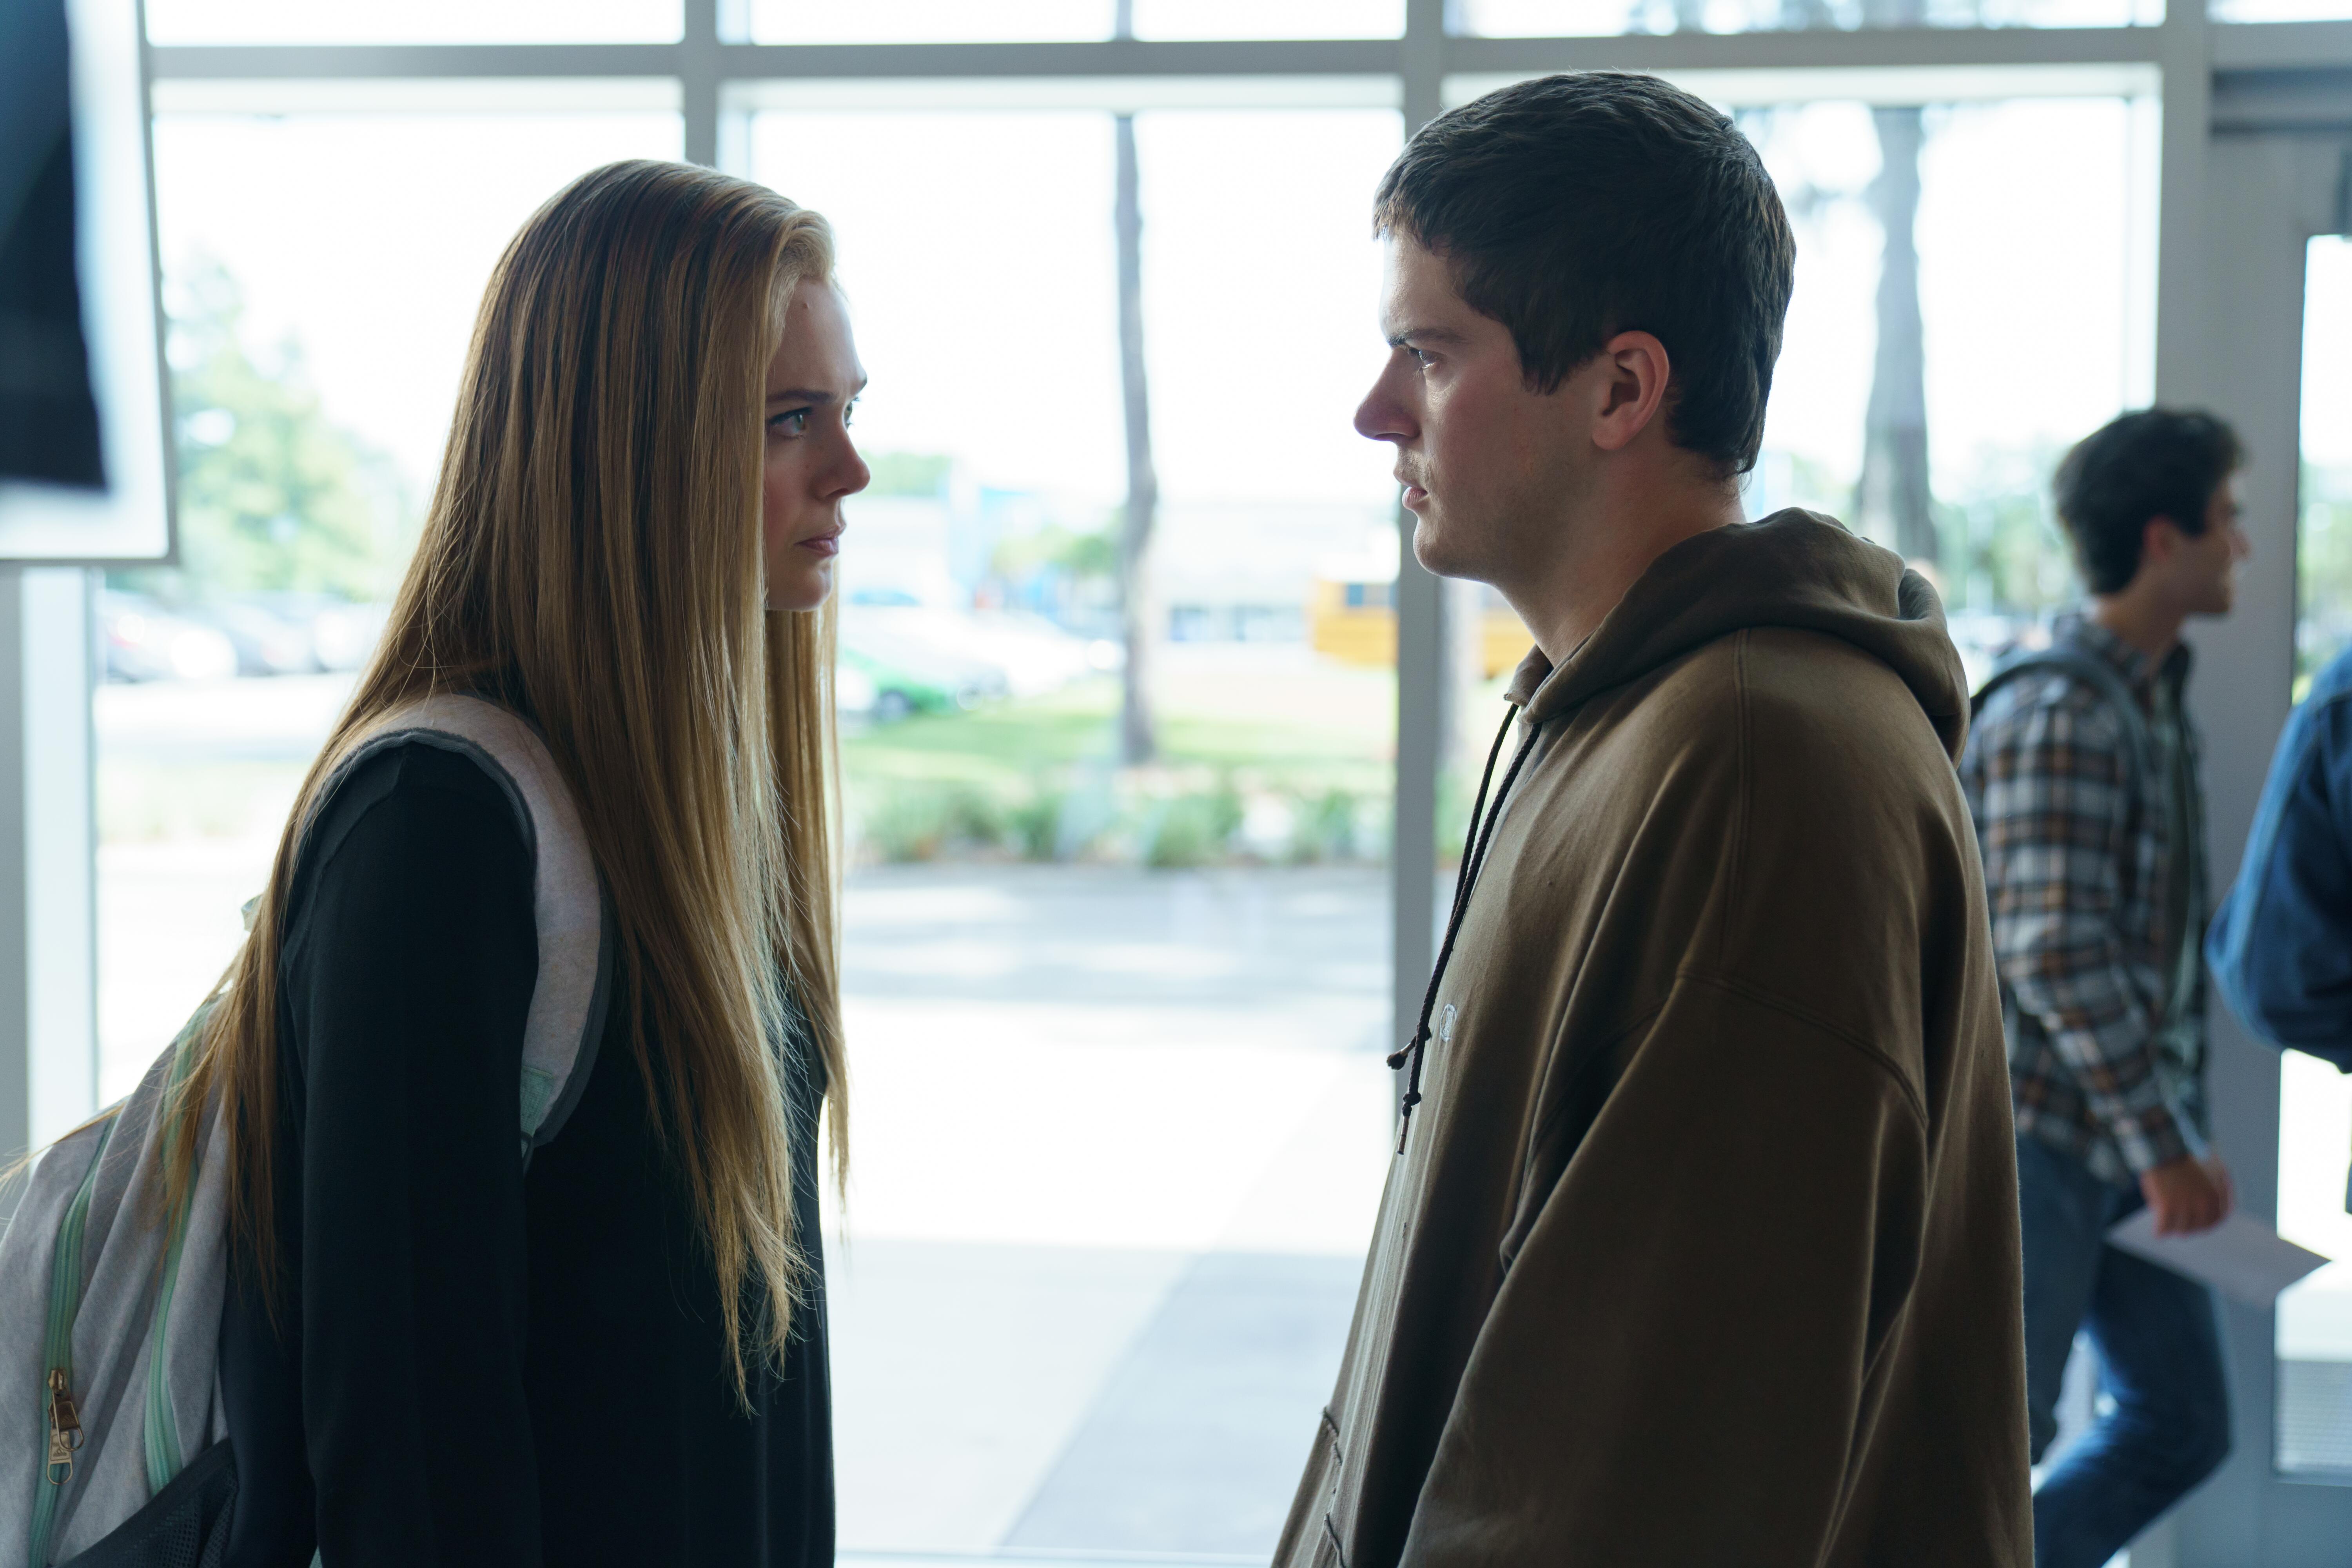 Elle Fanning as Michelle Carter and Colton Ryan as Conrad Roy in ‘The Girl From Plainville’ facing each other in a school.